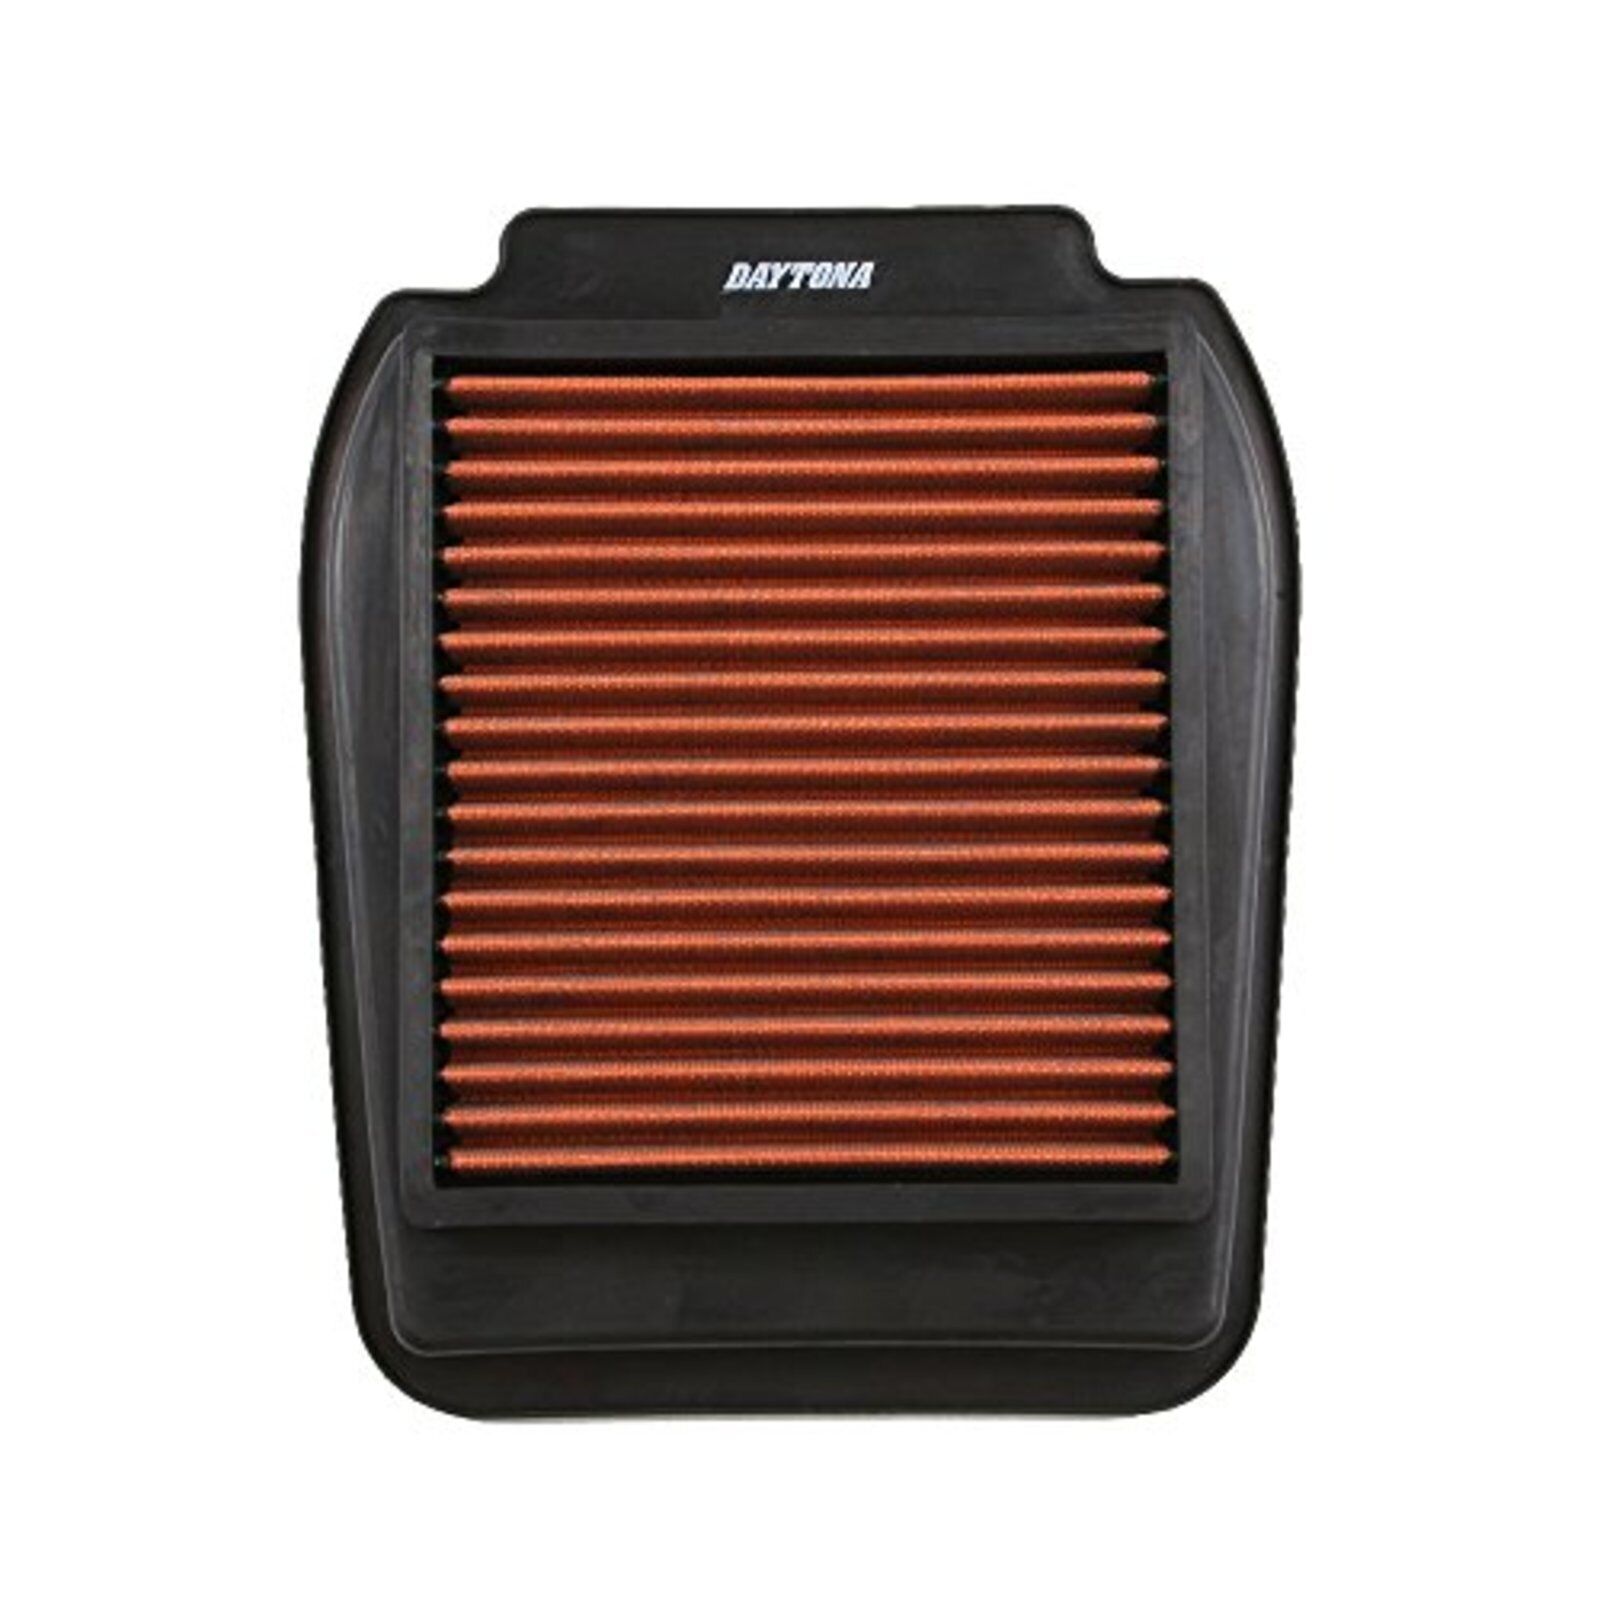 DAYTONA 78864 replacement air filter VTR250  w/Tracking# New from Japan